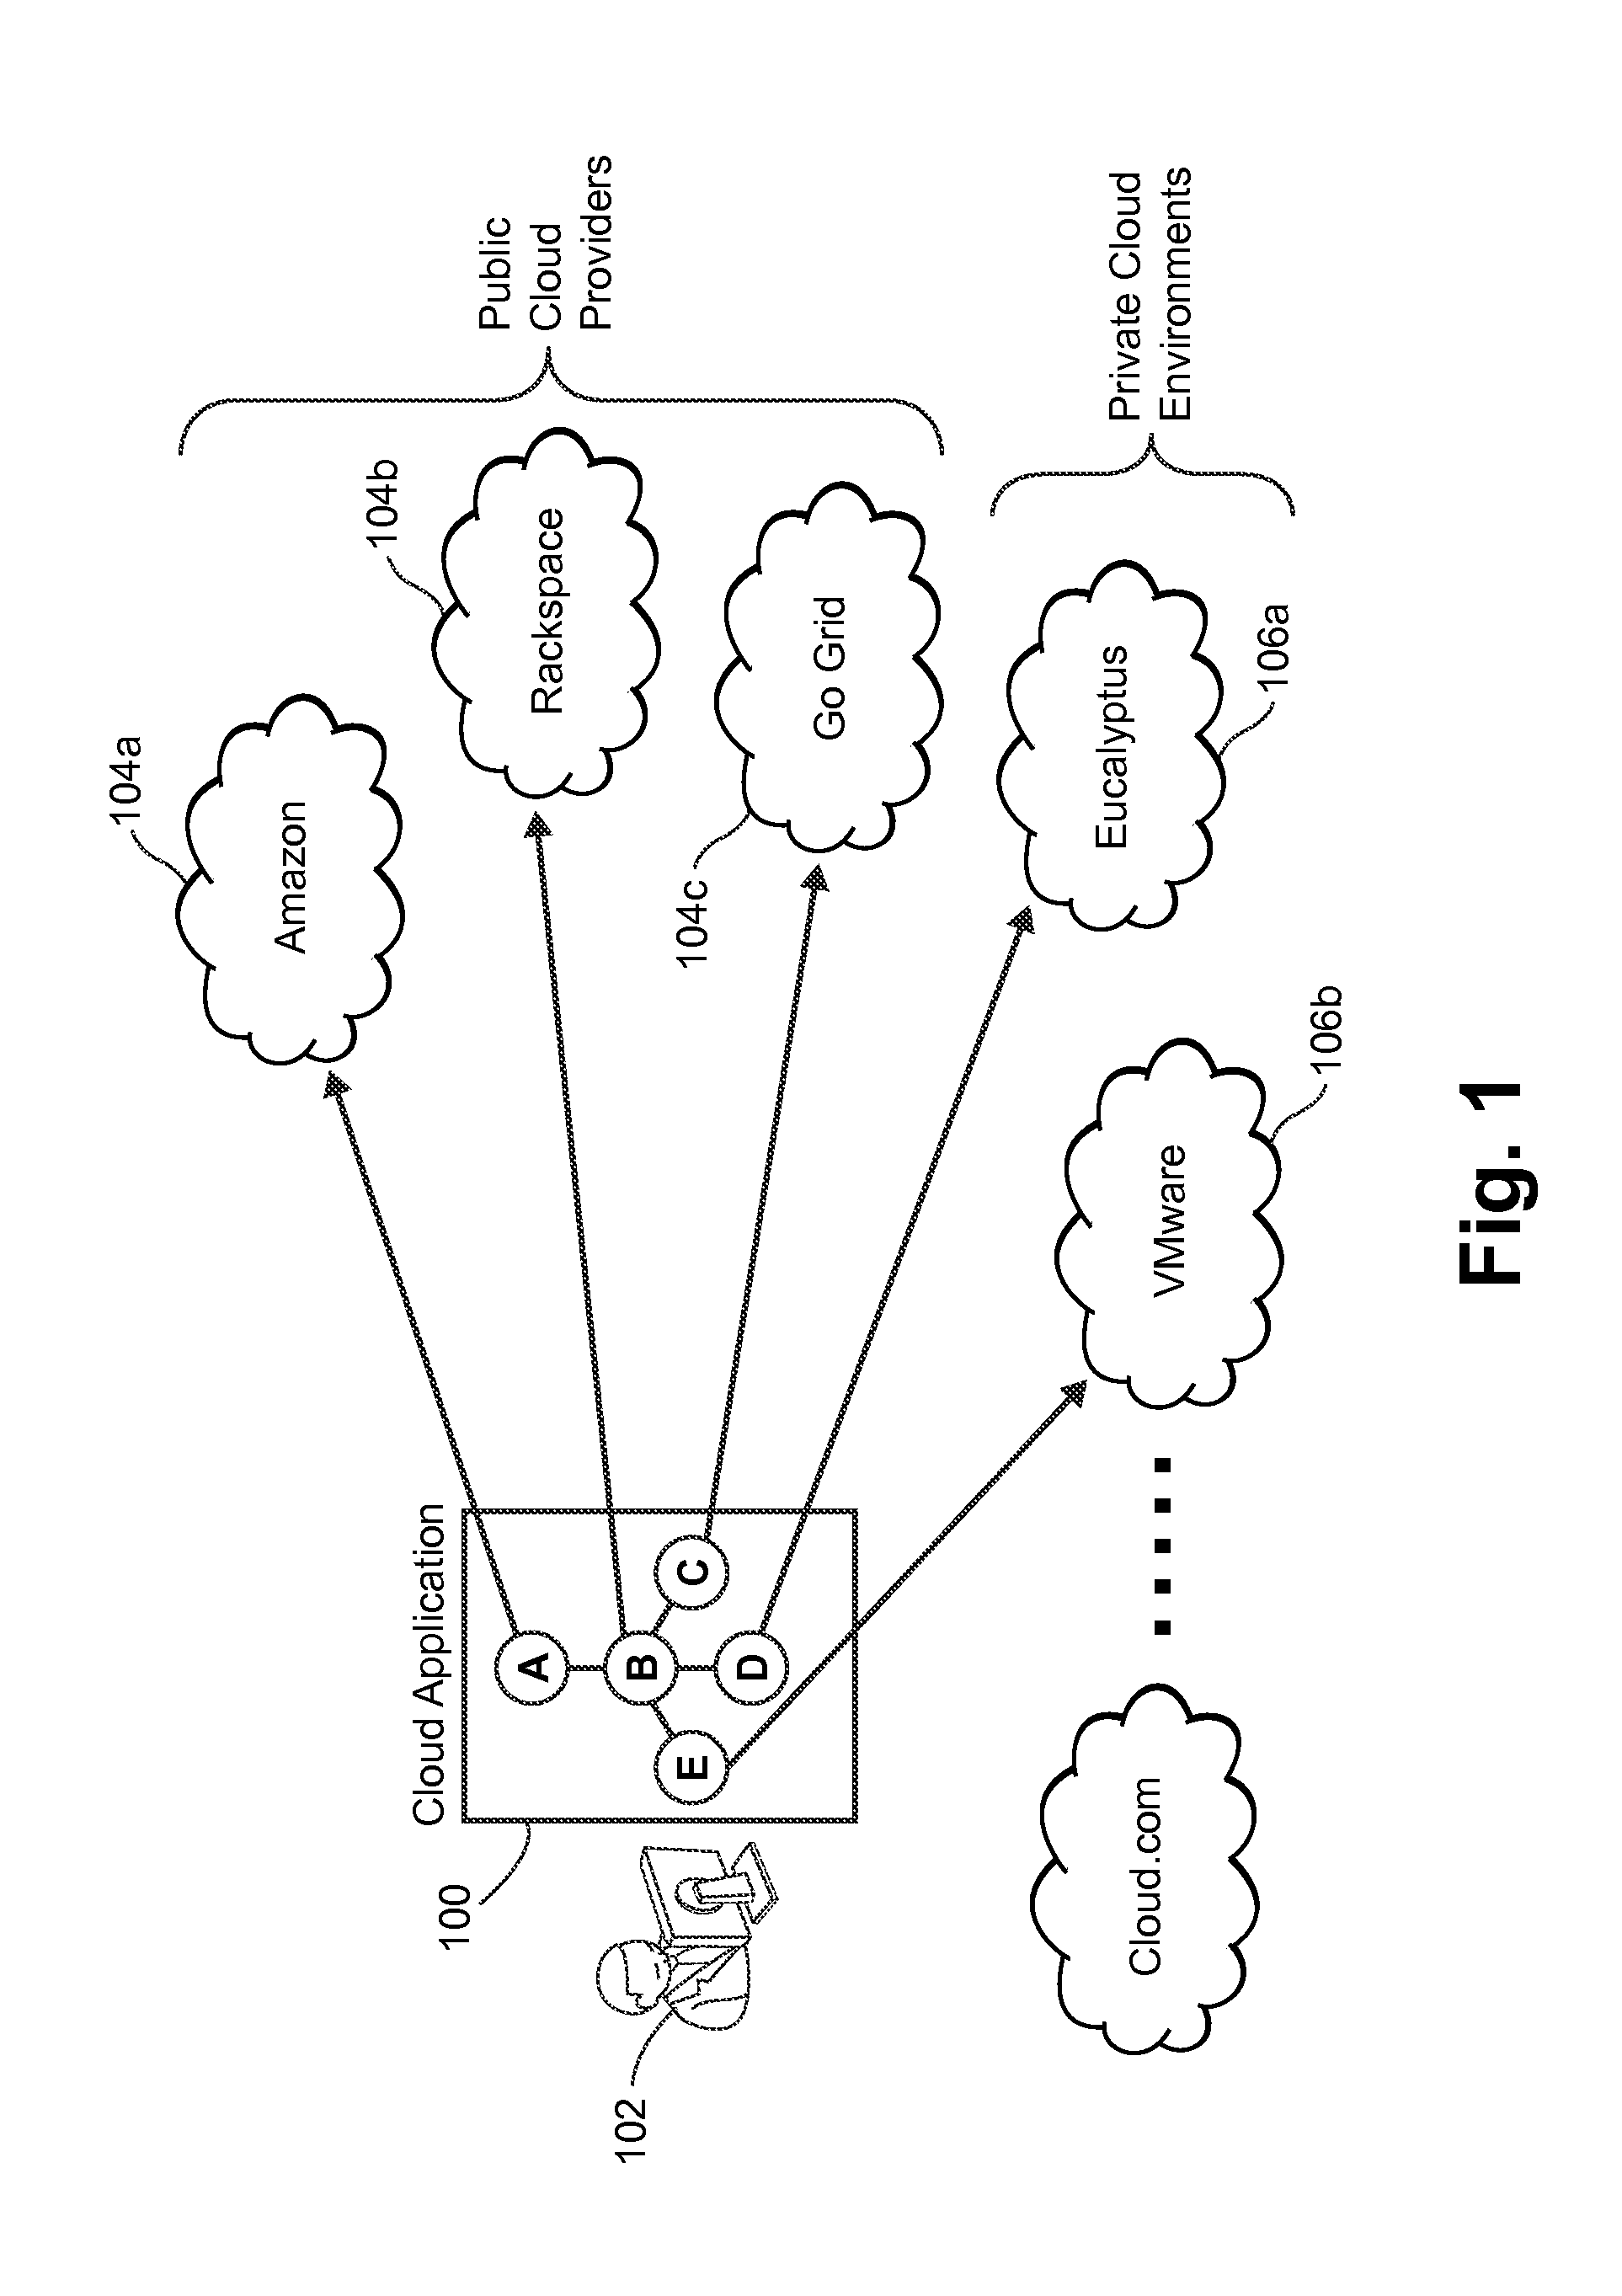 Distributed cloud application deployment systems and/or associated methods